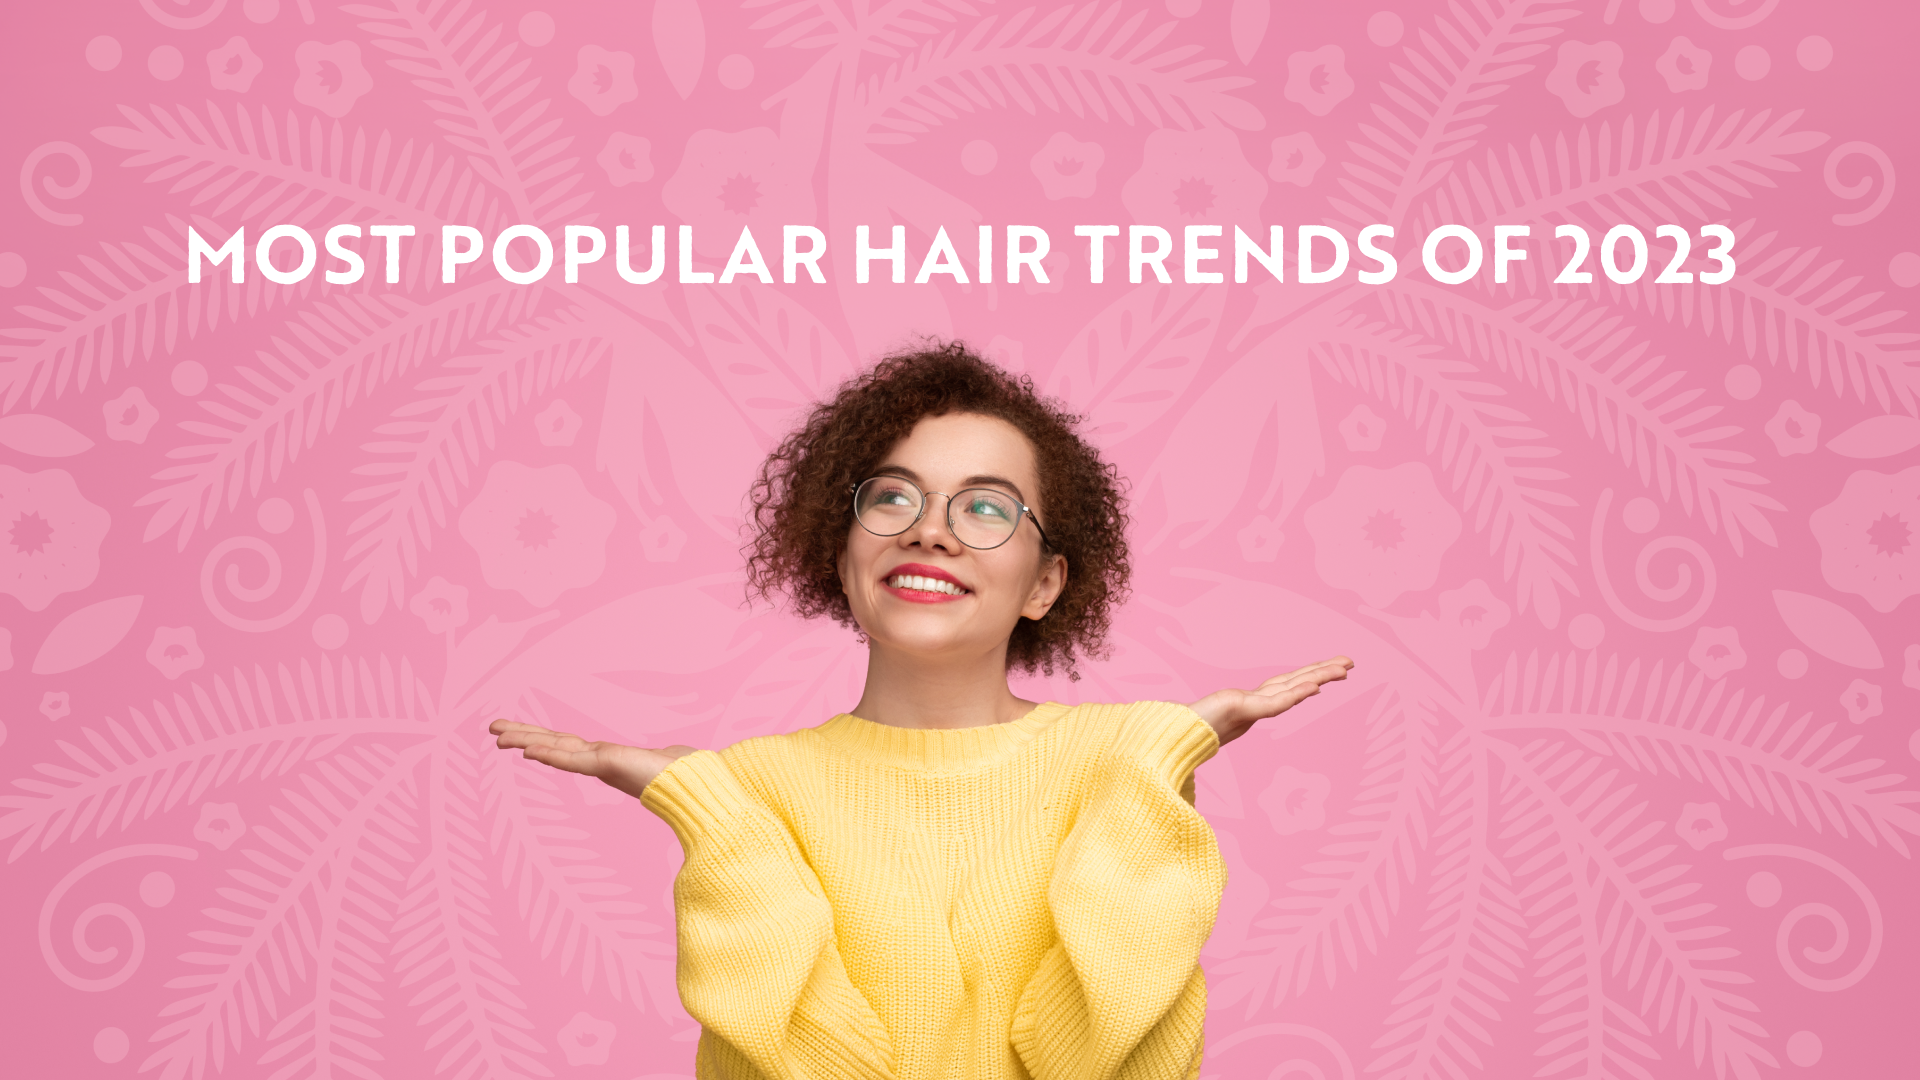 A Look Back at the Most Popular Hair Trends of 2023